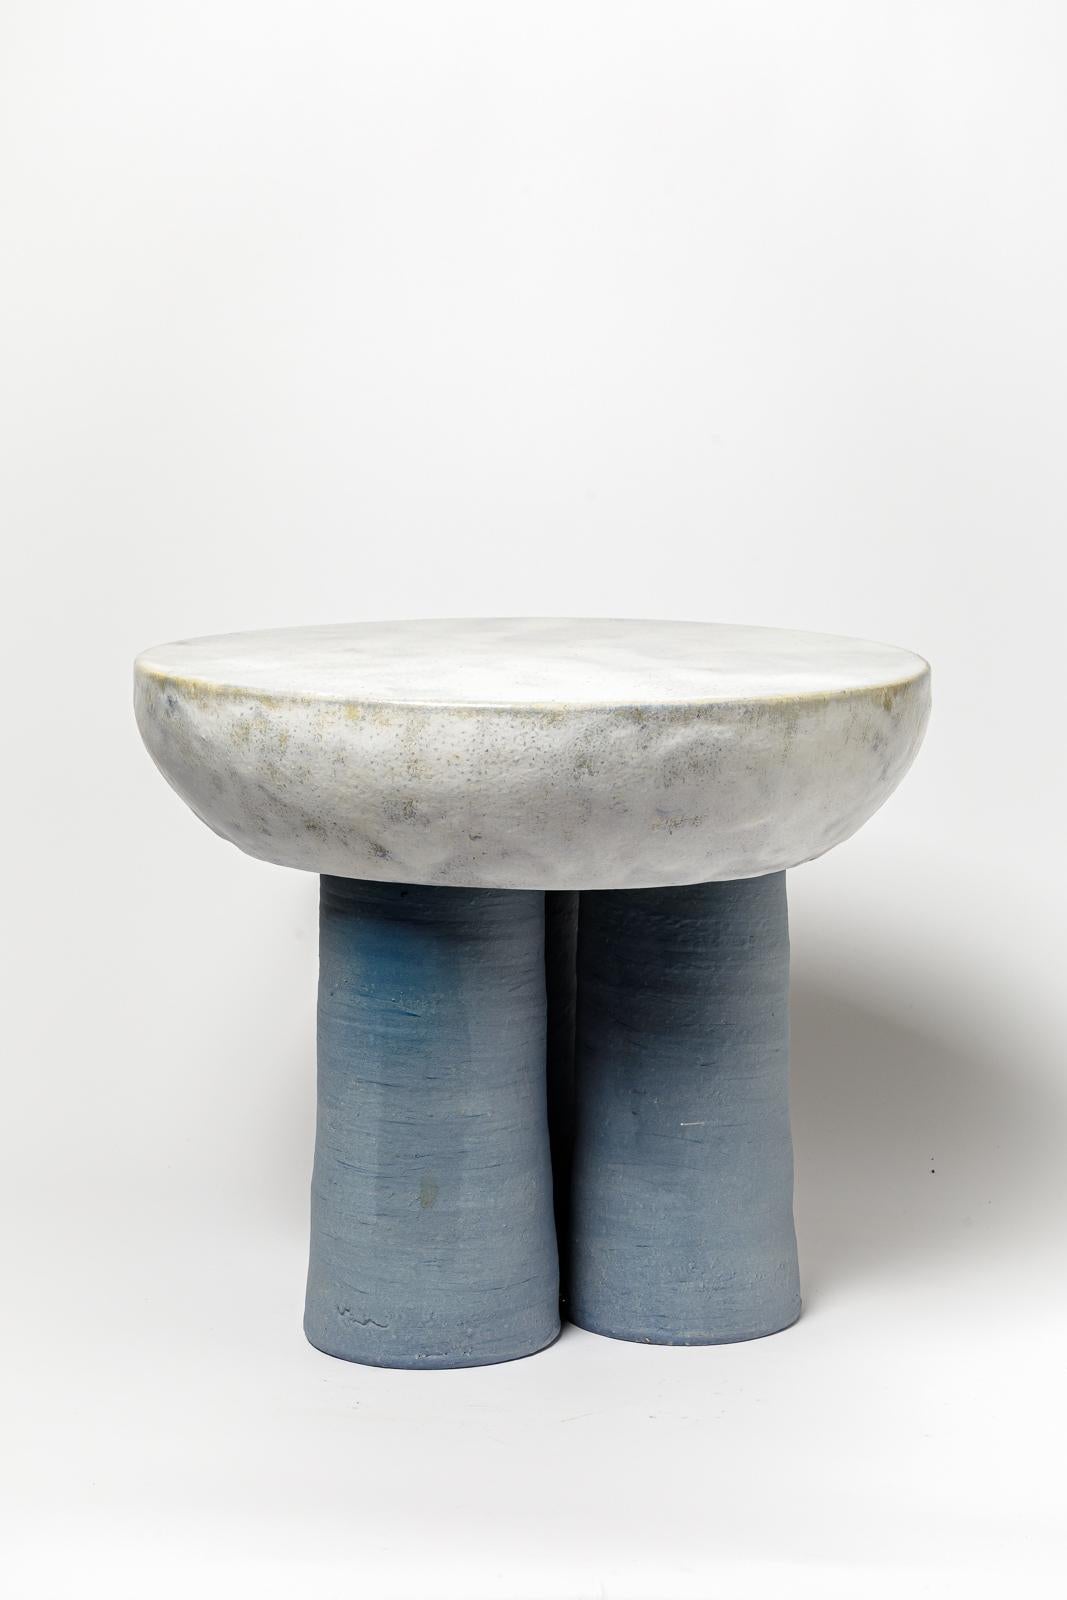 Beaux Arts Blue and yellow glazed ceramic stool or coffee table by Mia Jensen, 2023. For Sale